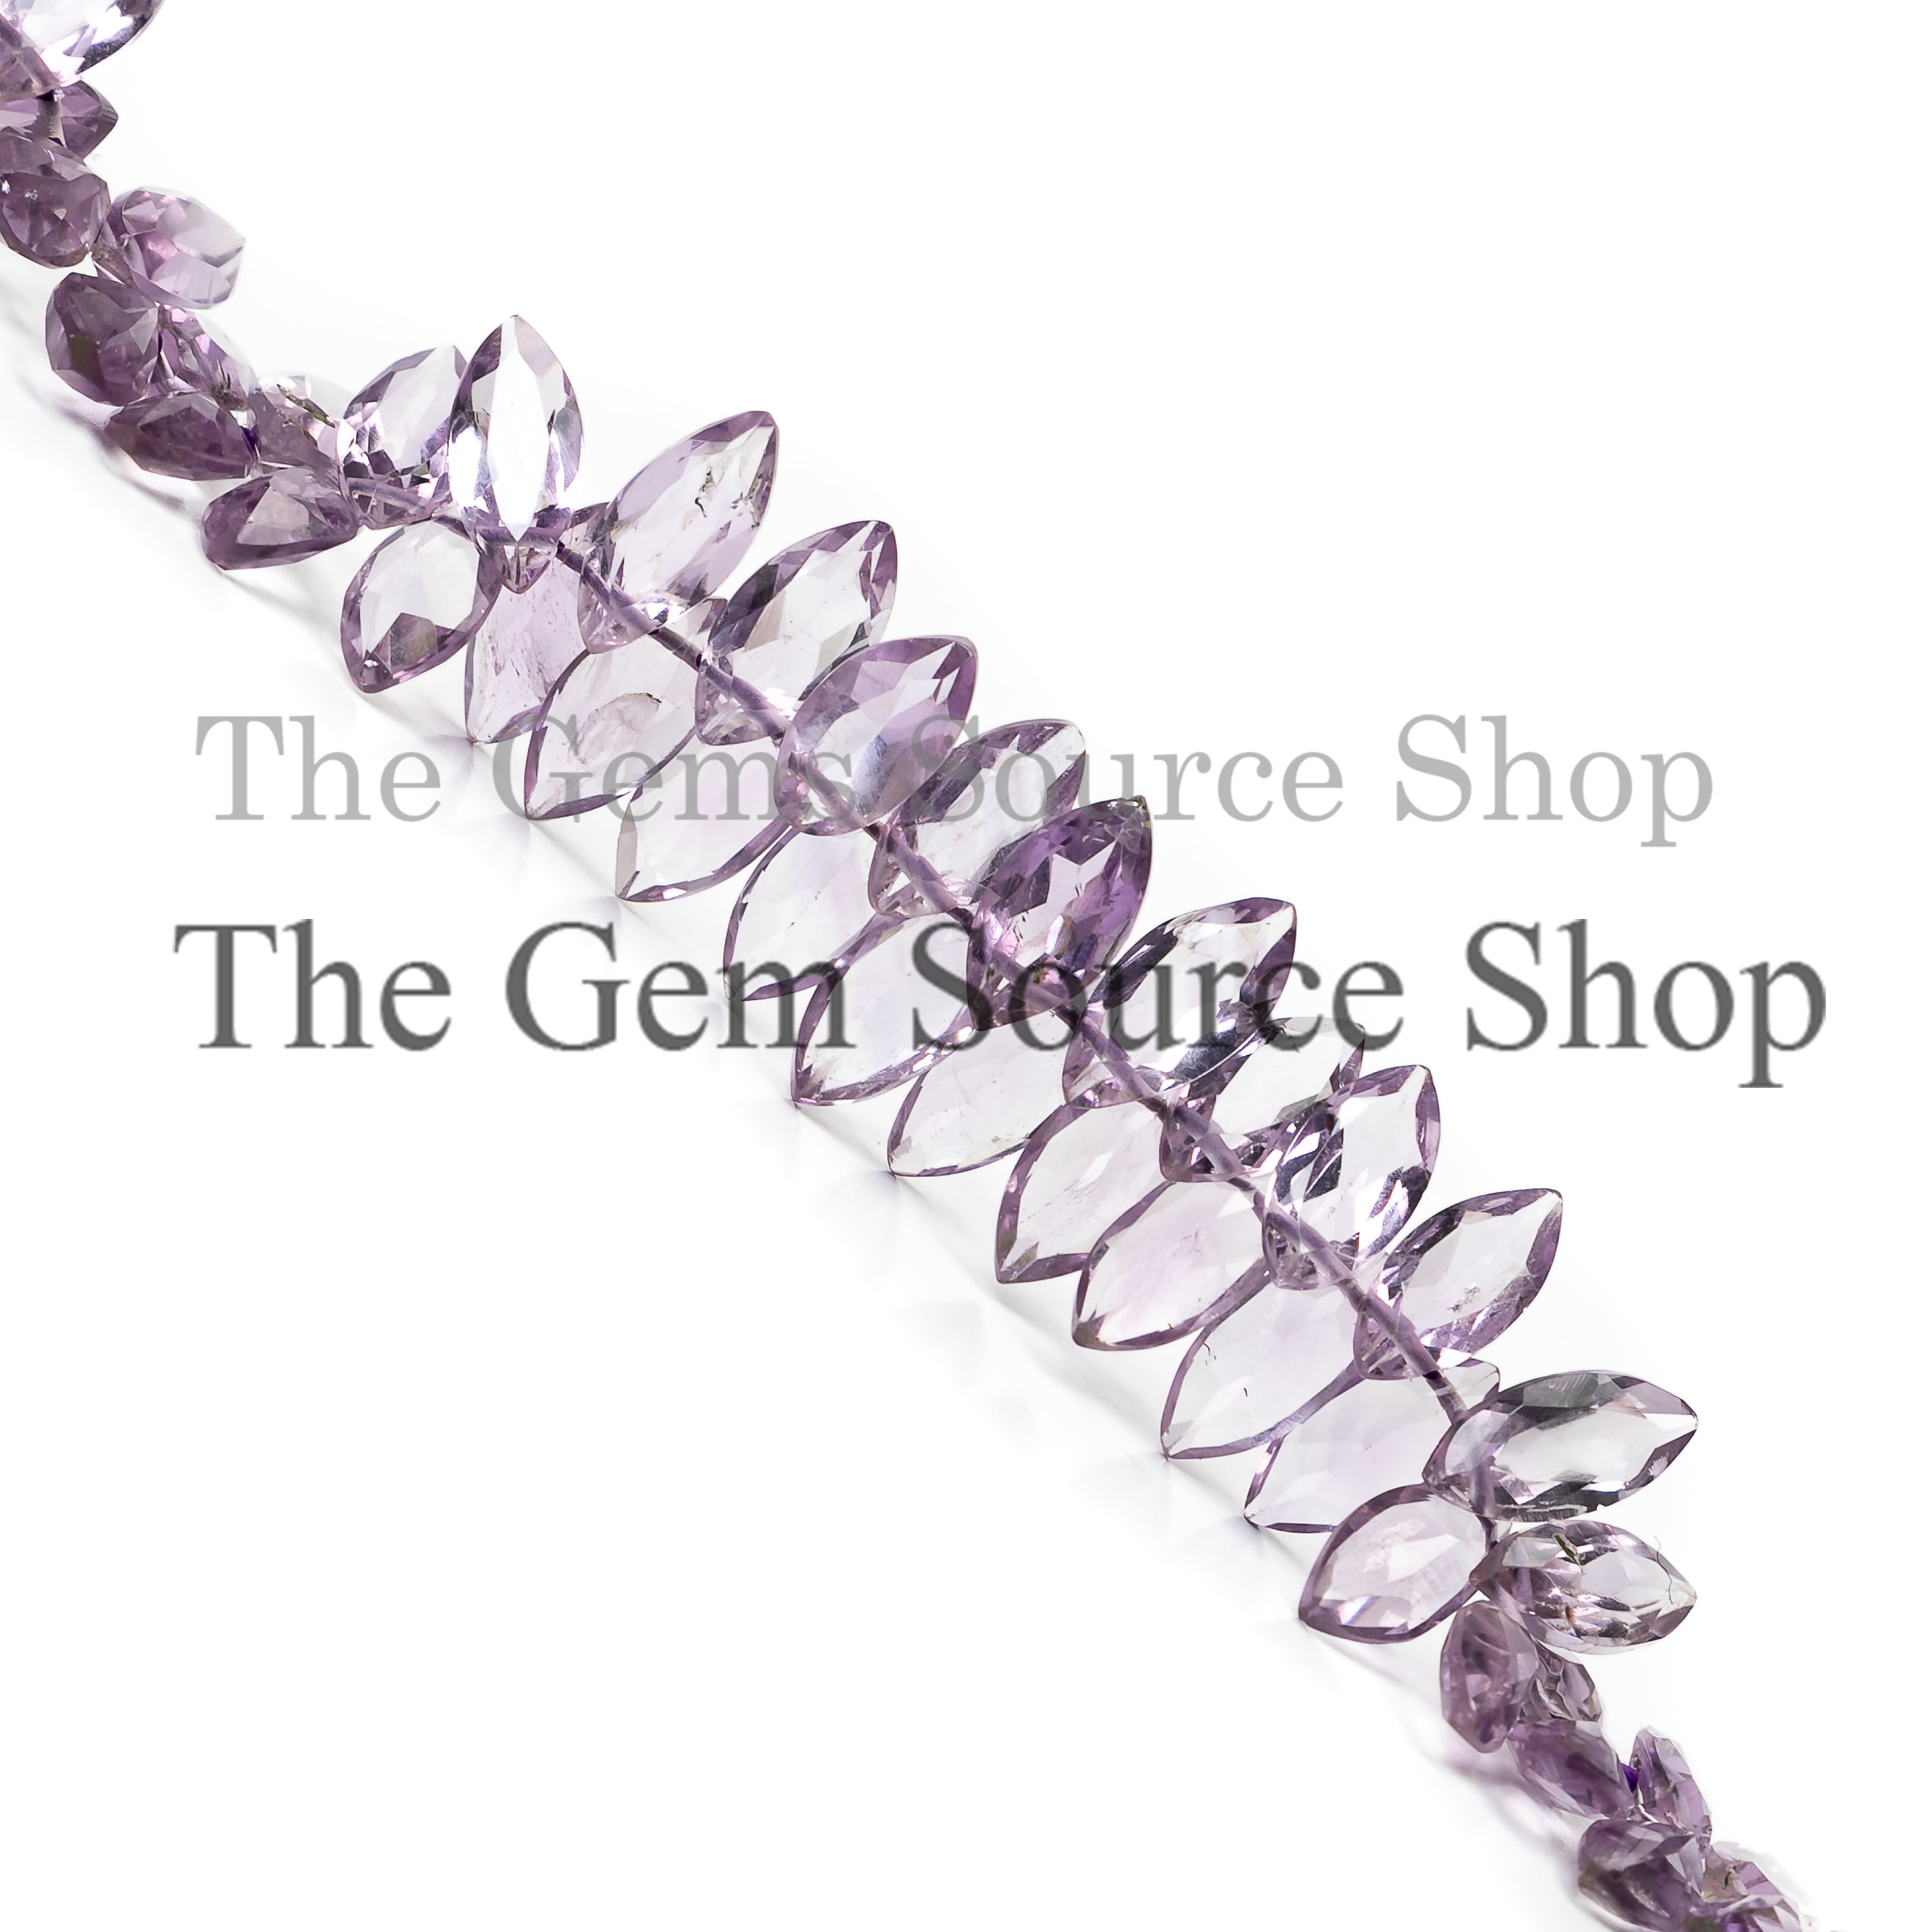 Amethyst Faceted Marquise Briolette, 4x8-5x9mm Gemstone Beads, Amethyst Beads Strand, Briolette Cut Marquise Shape Beads, Faceted Beads